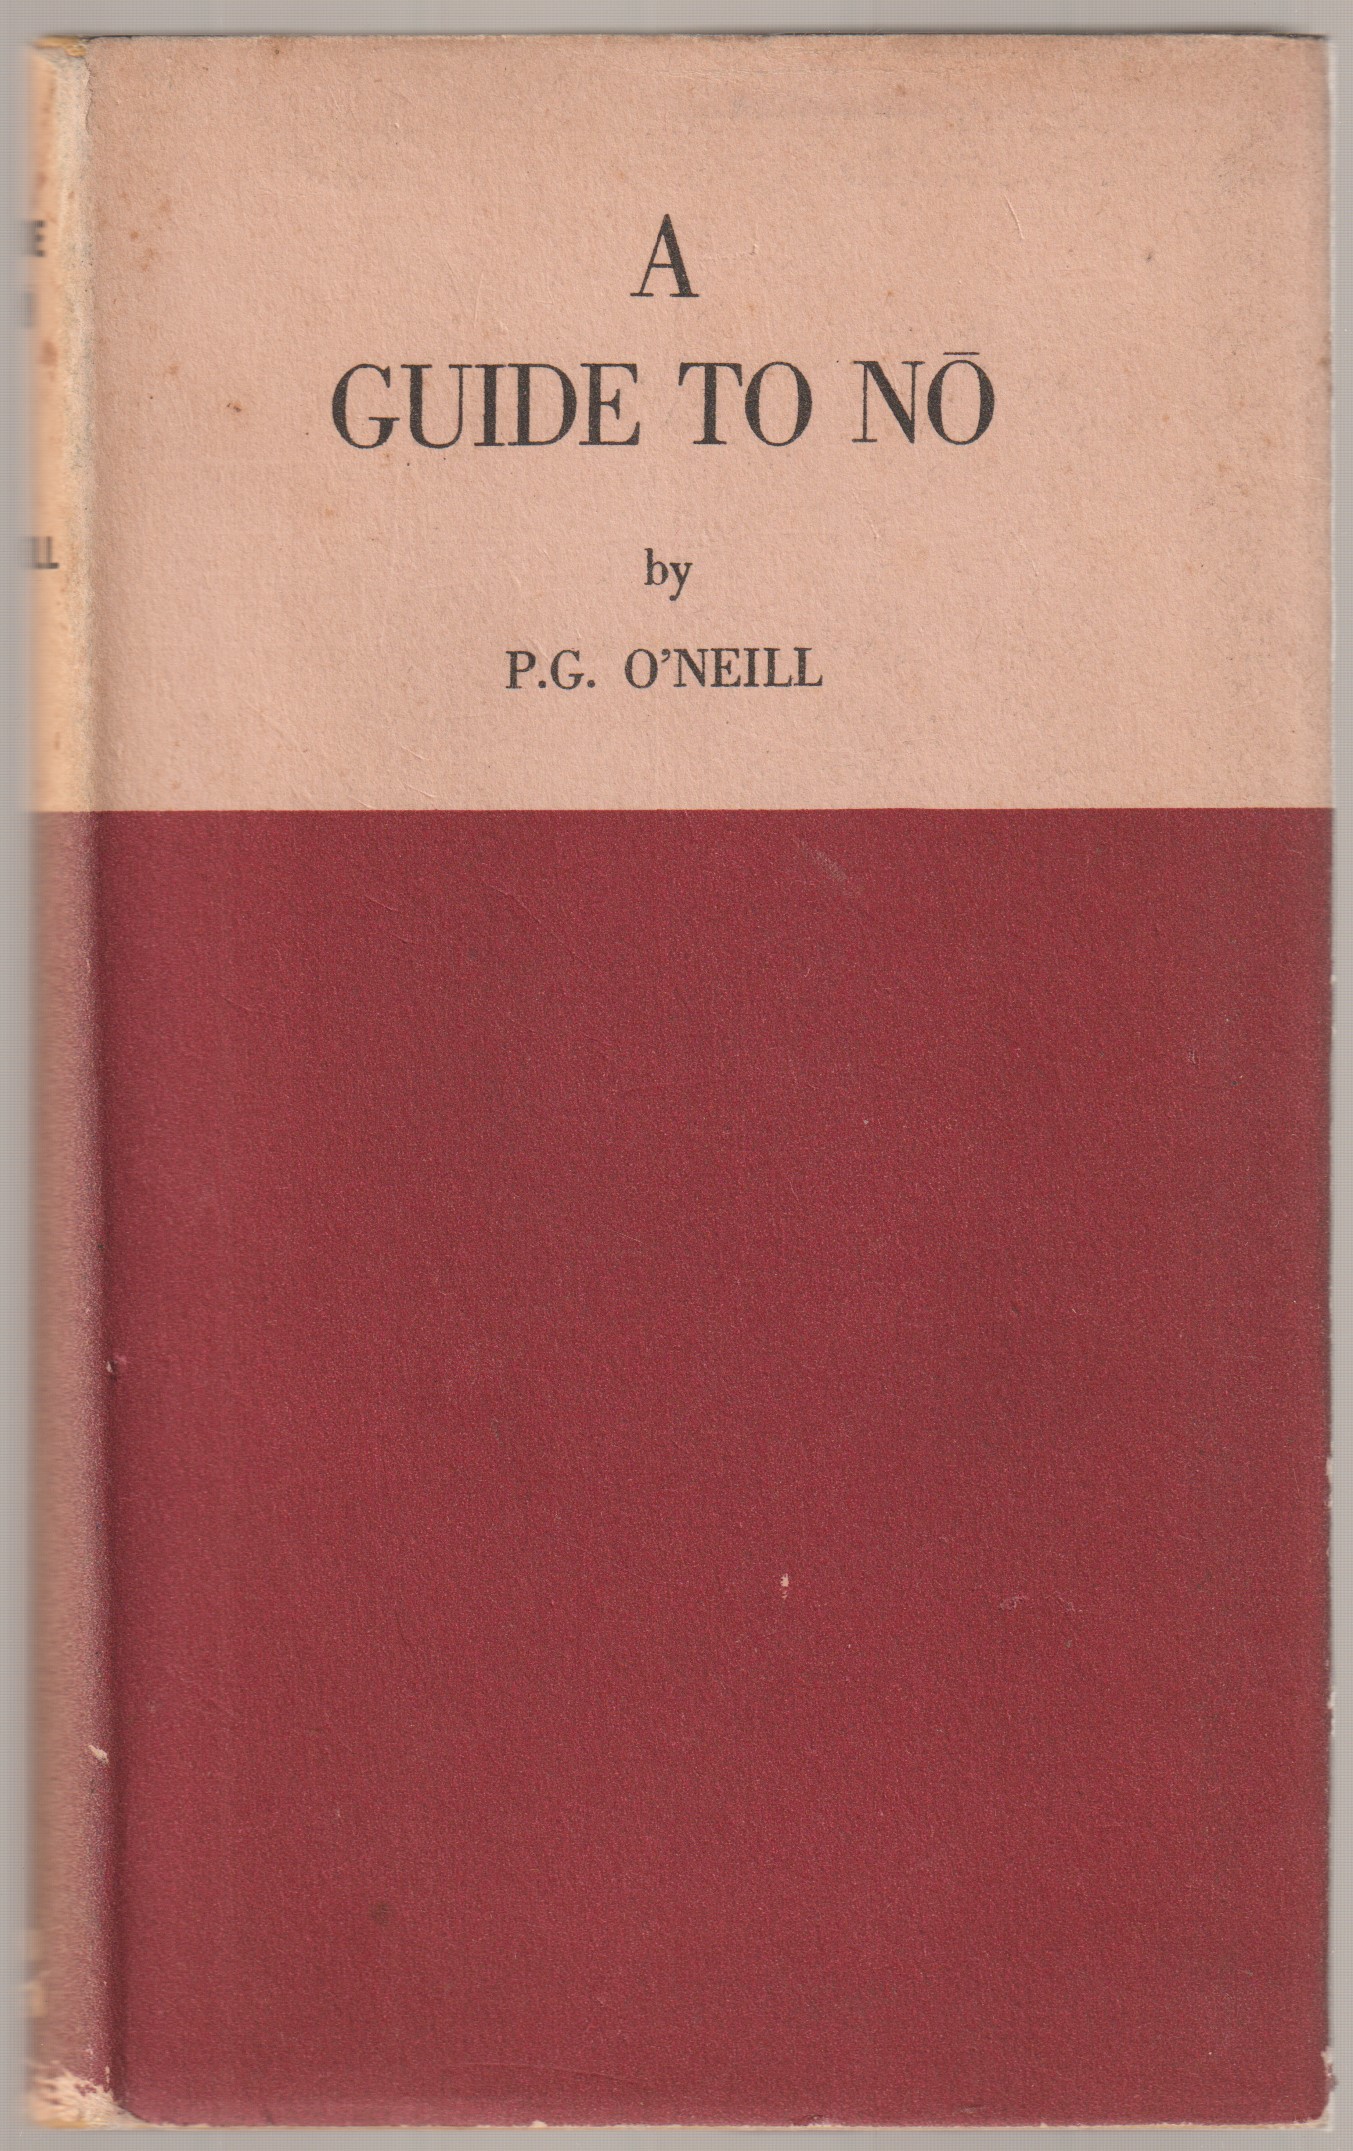 A guide to no